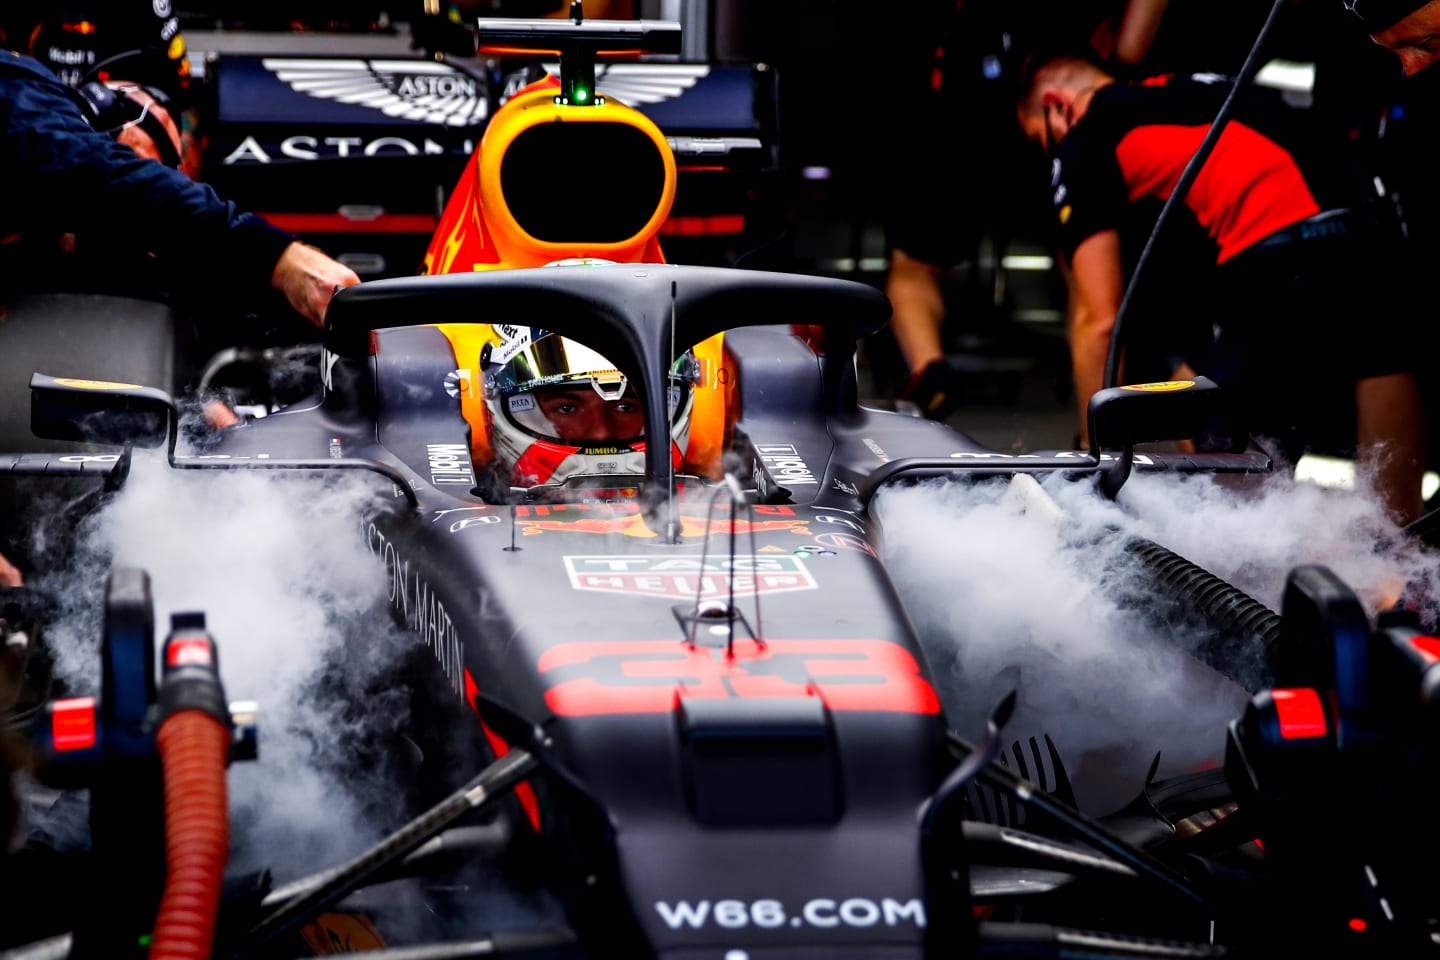 BARCELONA, SPAIN - AUGUST 15: Max Verstappen of Netherlands and Red Bull Racing in the garage during qualifying for the F1 Grand Prix of Spain at Circuit de Barcelona-Catalunya on August 15, 2020 in Barcelona, Spain. (Photo by Mark Thompson/Getty Images)